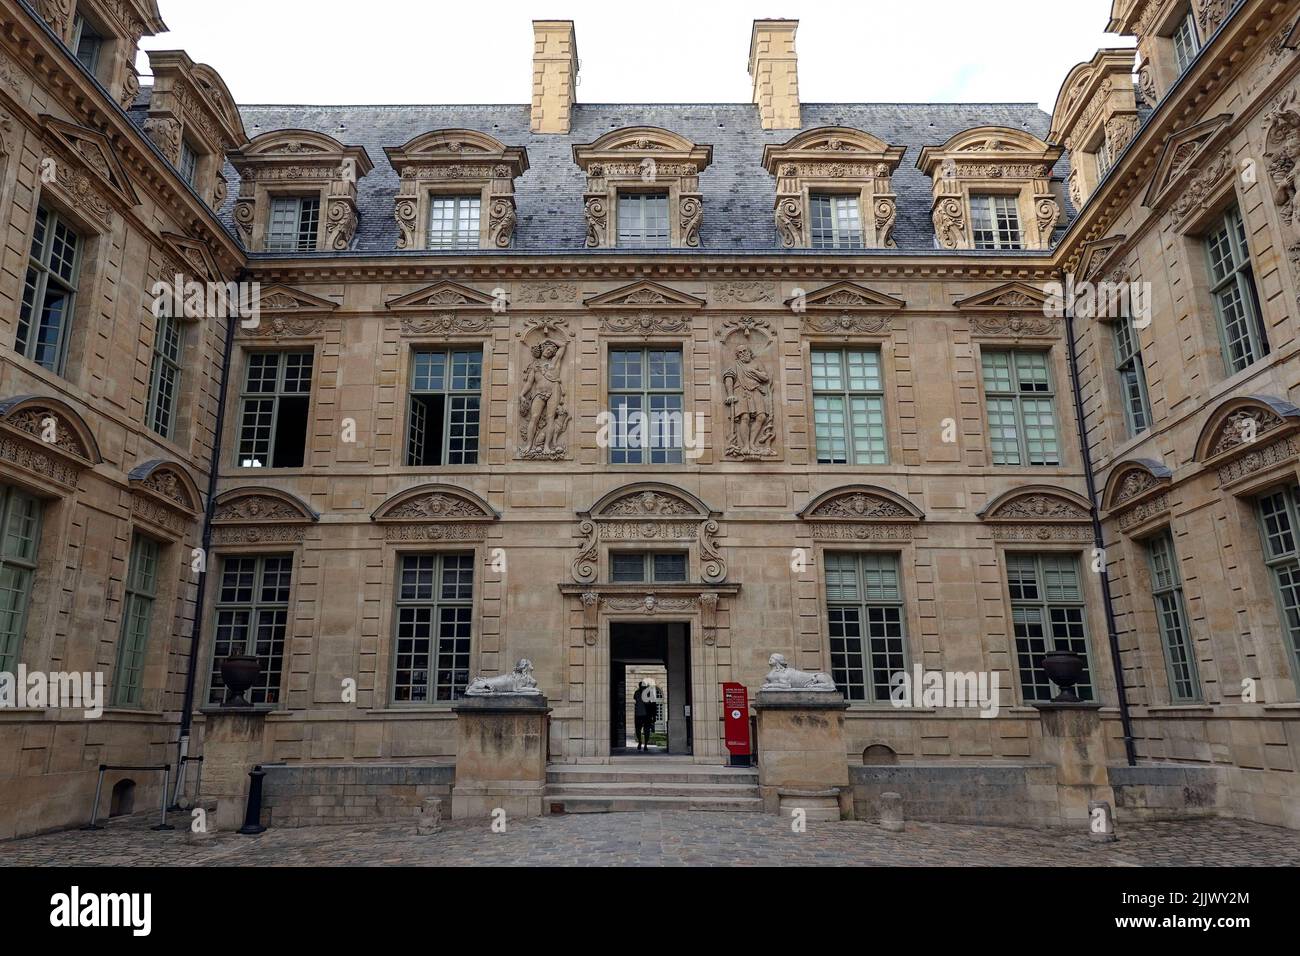 France, Paris, The Hotel de Sully is a Louis XIII style,  Hotel particulier, or private mansion, located at 62 rue Saint-Antoine in the Marais, IV arr Stock Photo